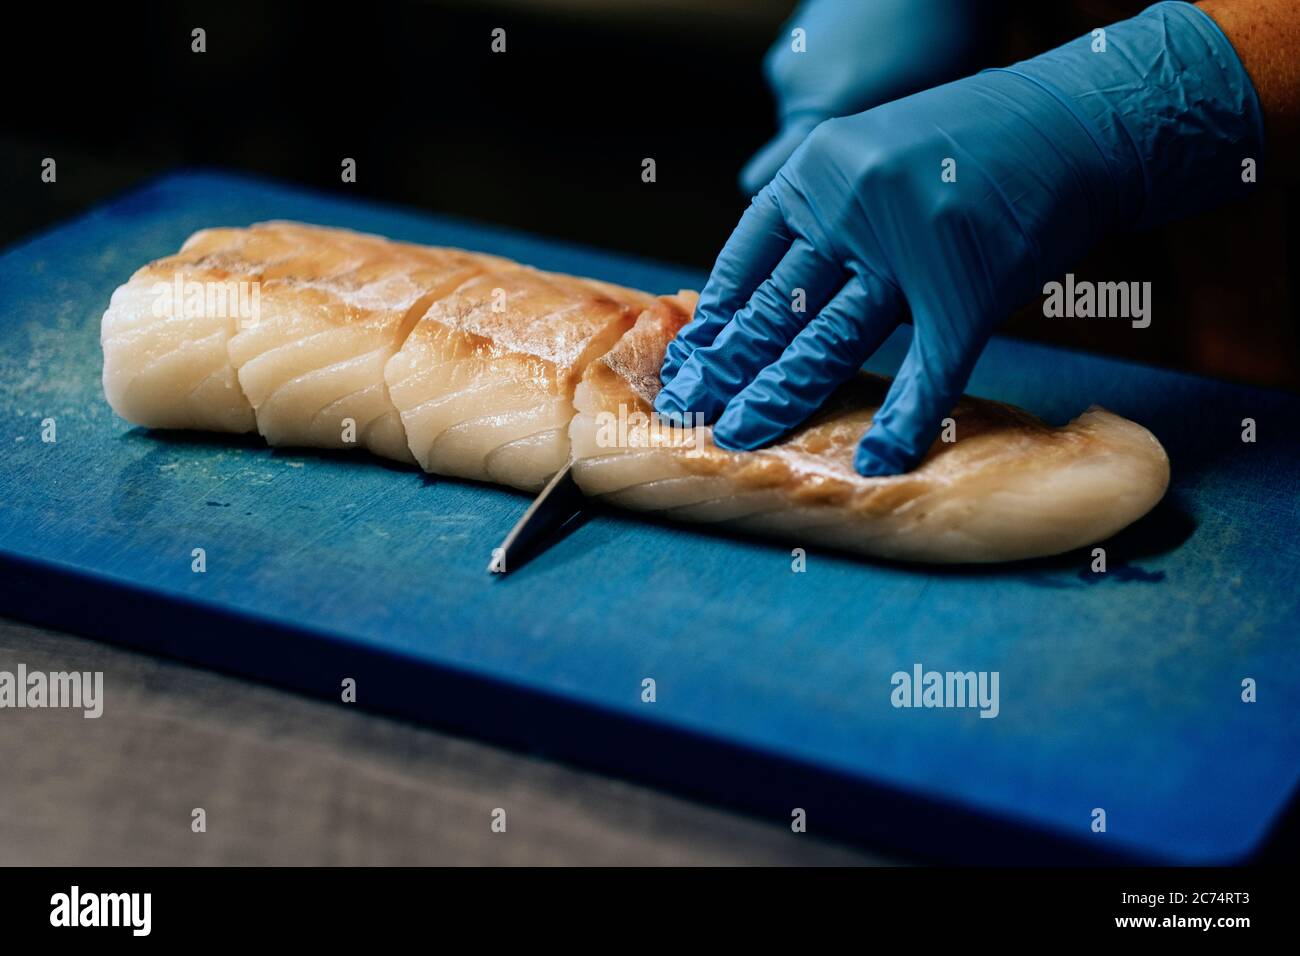 close-up on hands in blue latex gloves cutting raw fish on chopping board Stock Photo